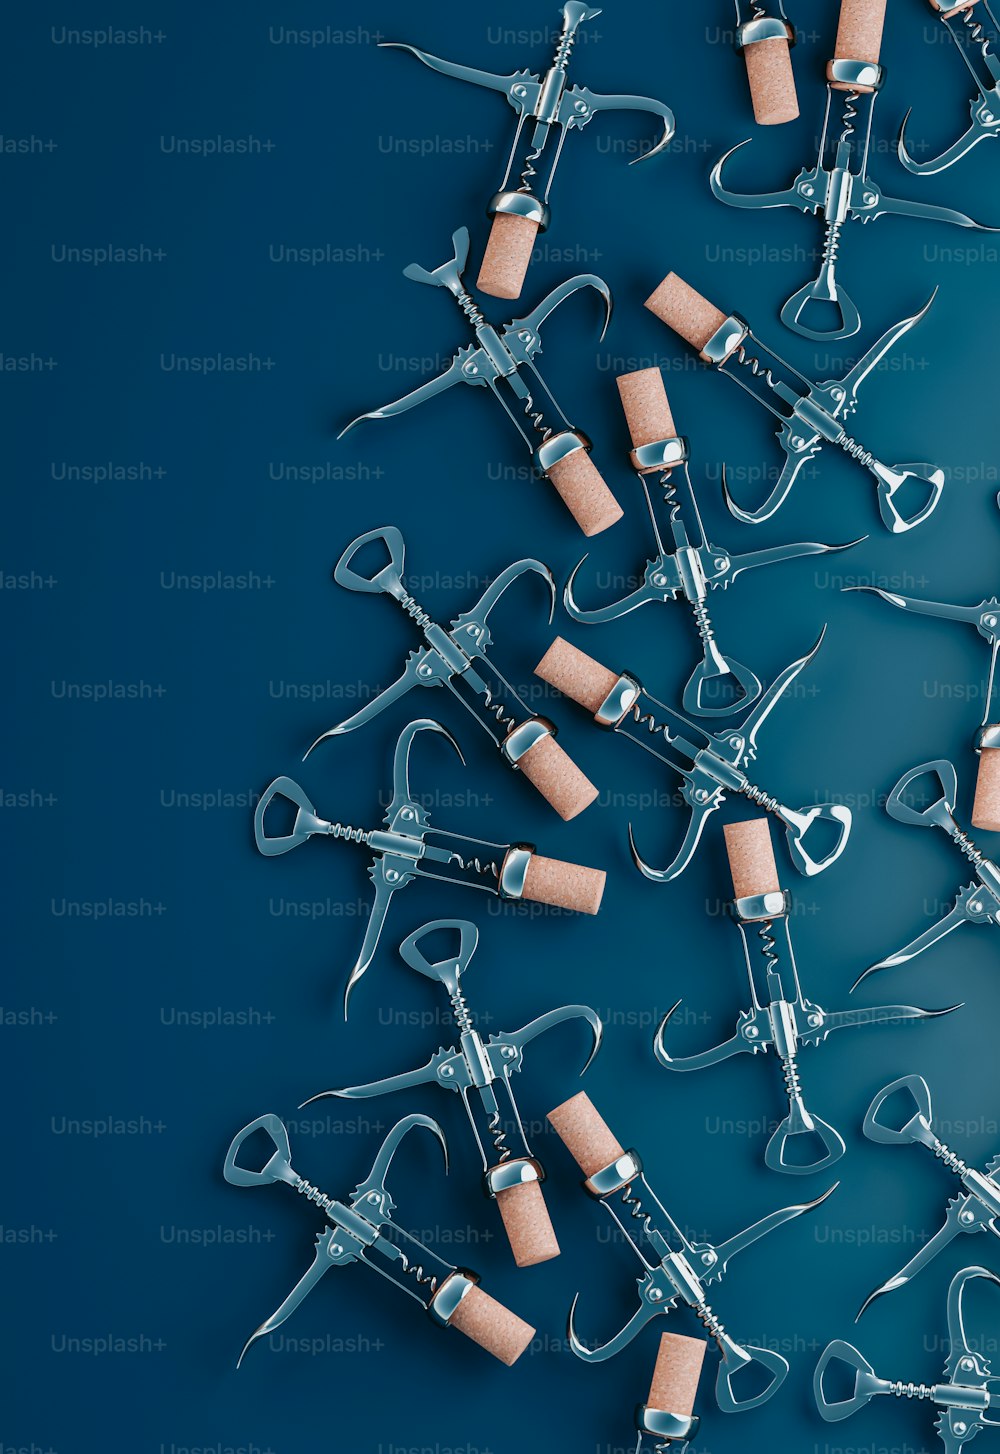 a group of surgical instruments with corks on them